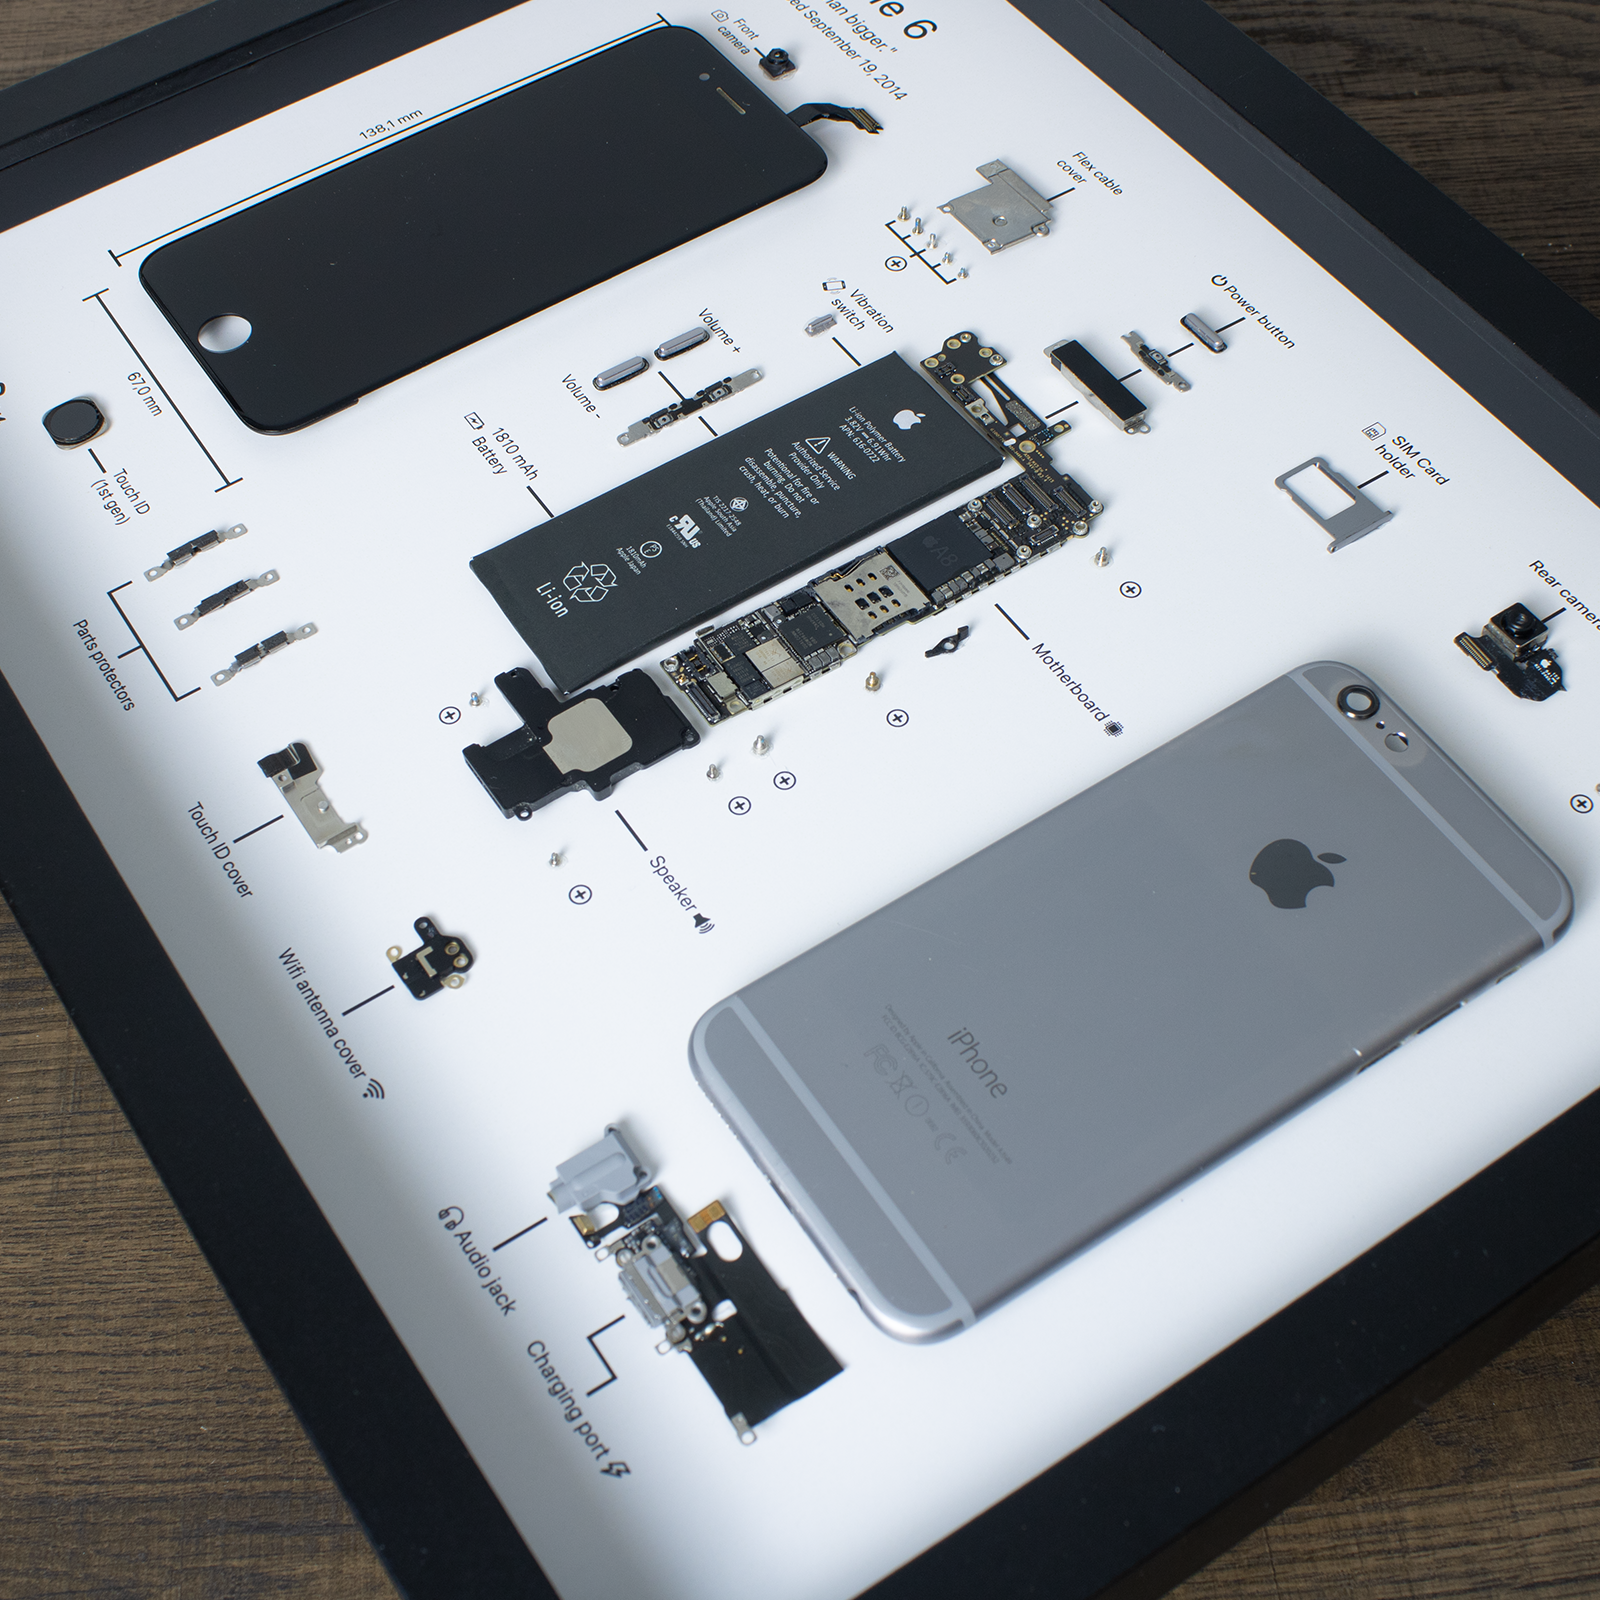 iPhone 6 disassembled in a frame